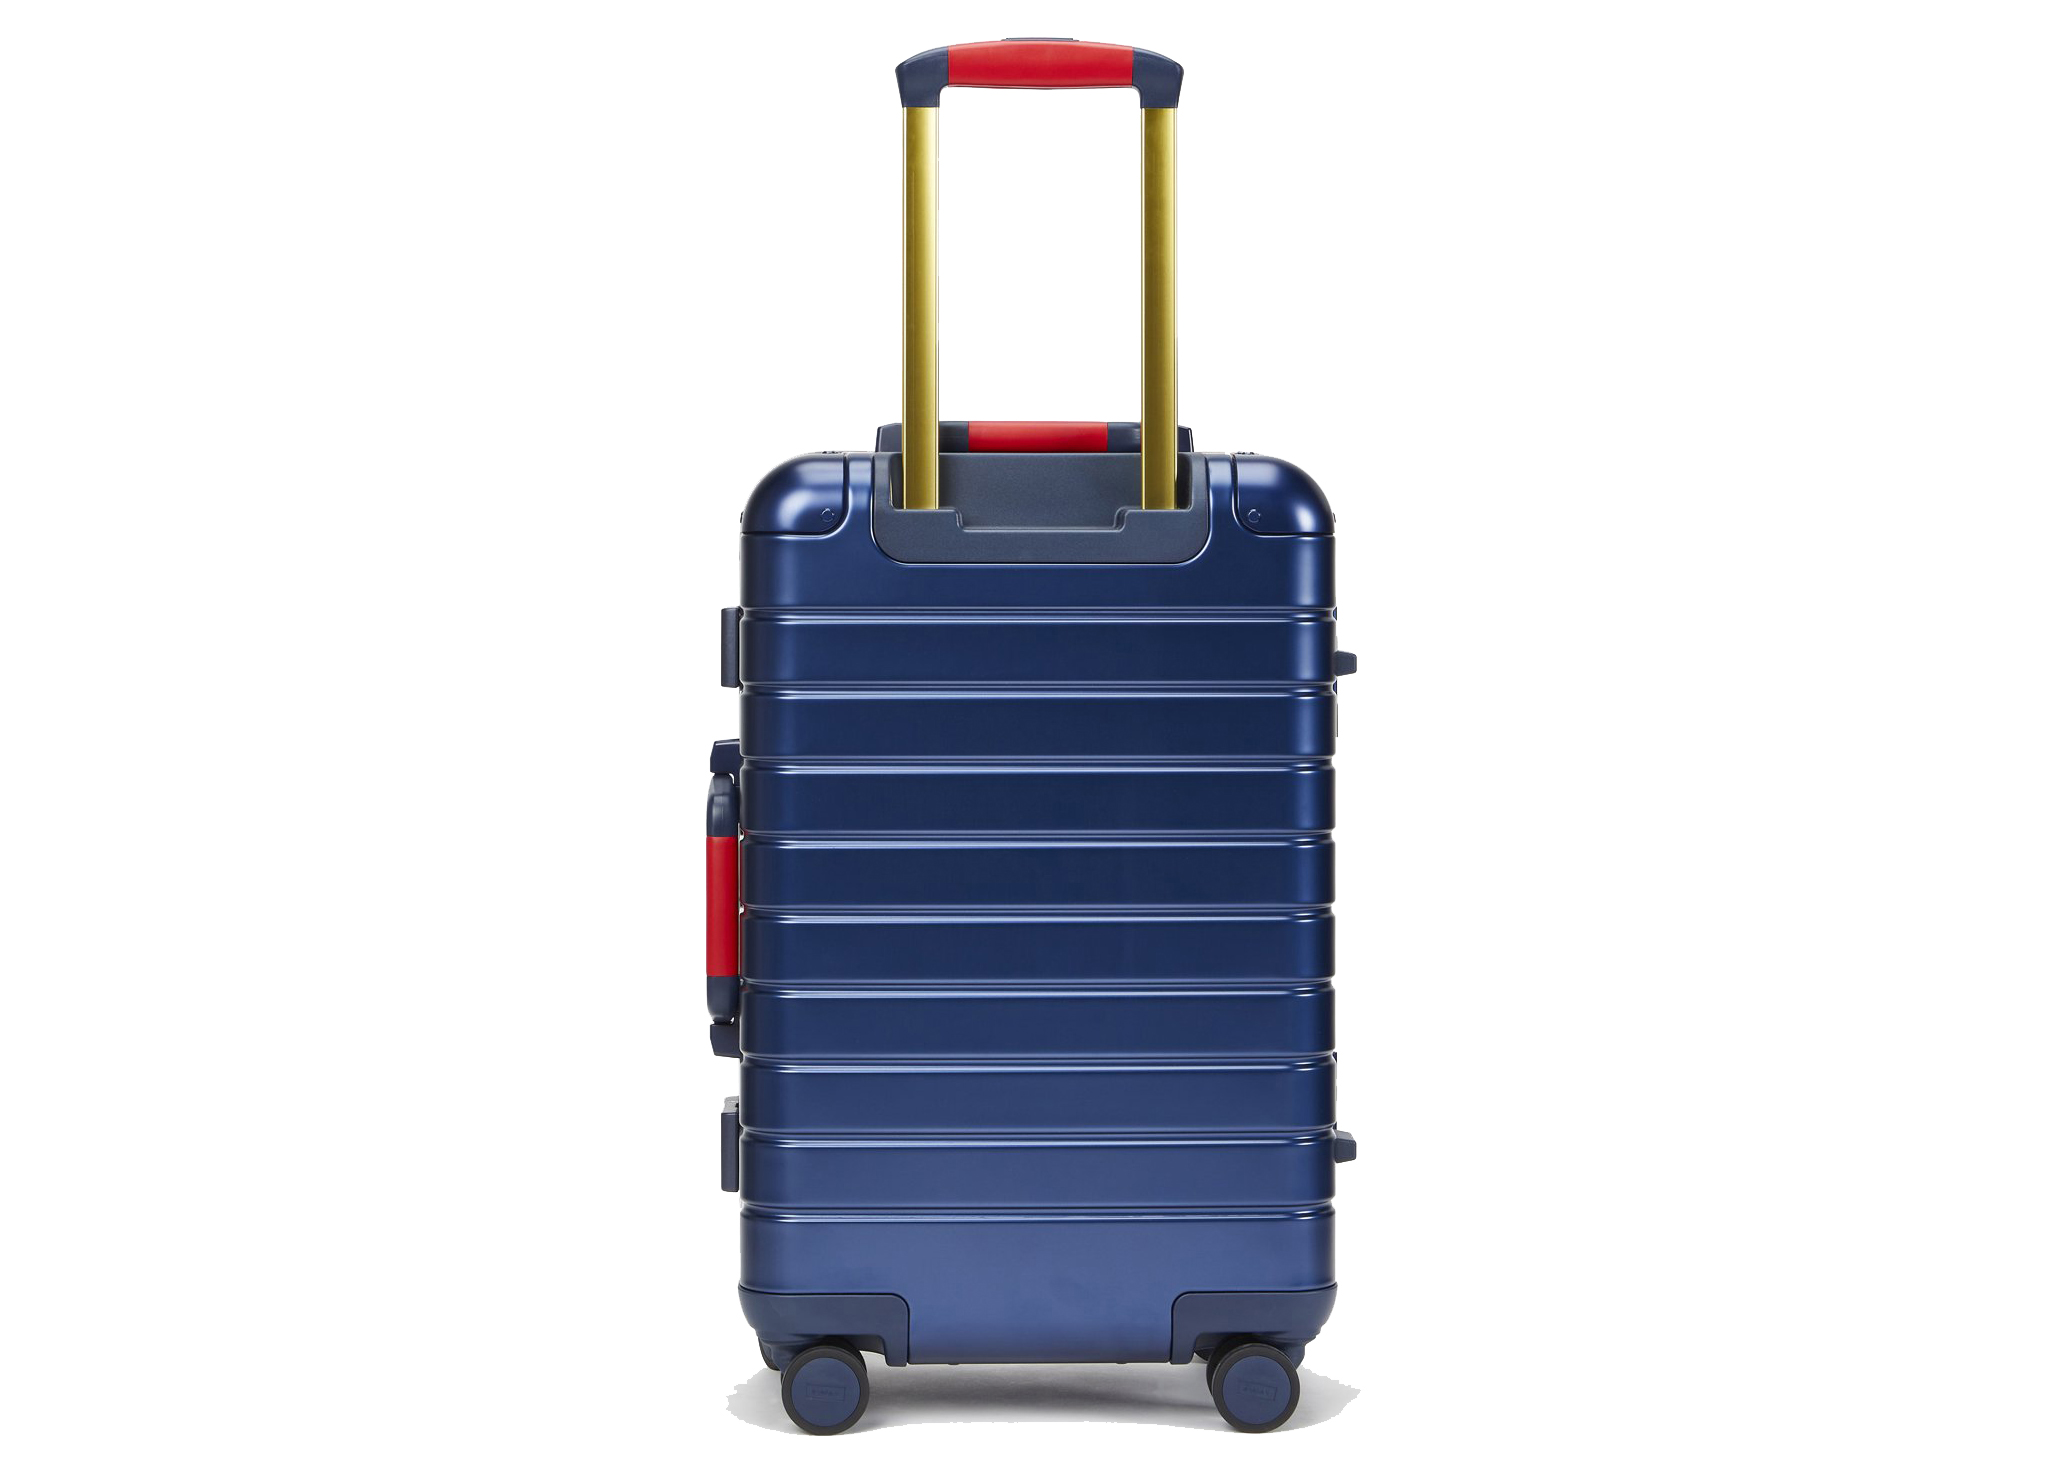 Kith for Team USA & Away Aluminum Bigger Carry-On Luggage Navy 